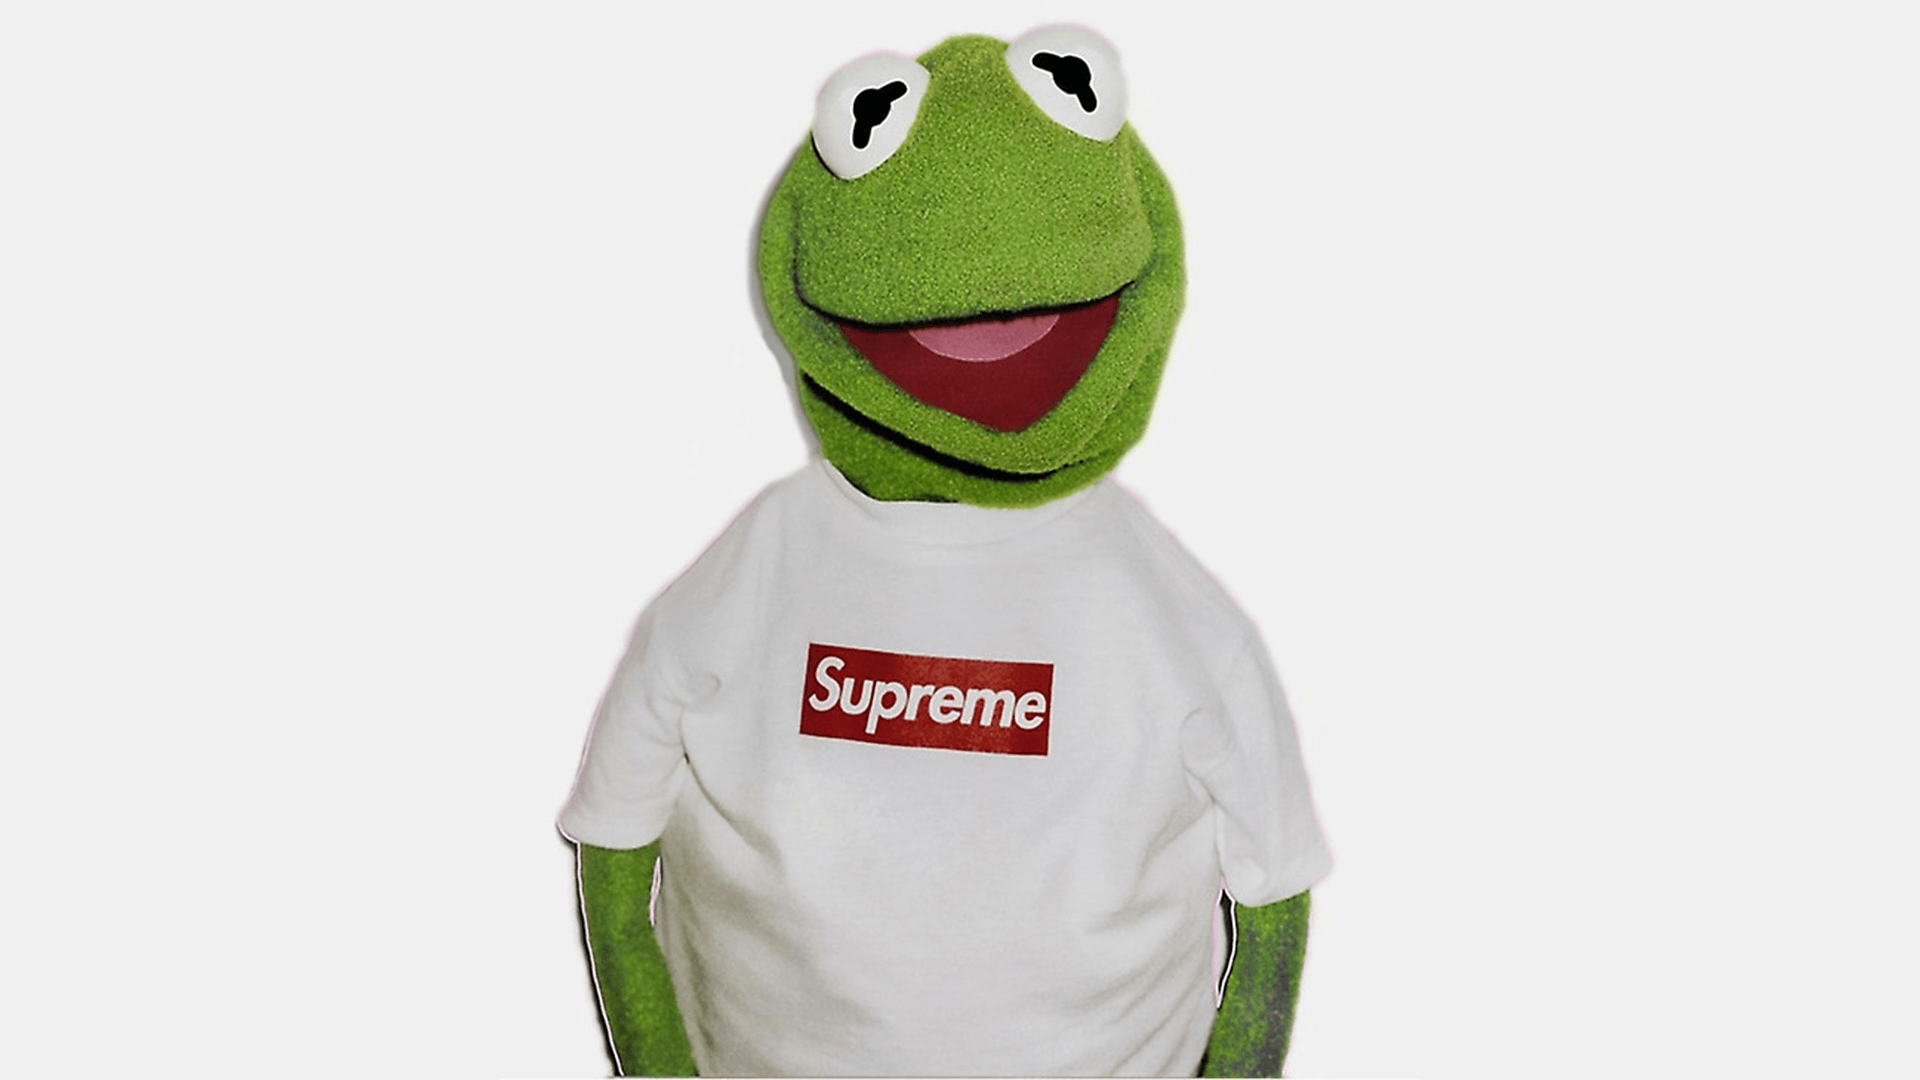 Kermit Supreme Wallpaper (1920x1080) Couldn't find one so made one